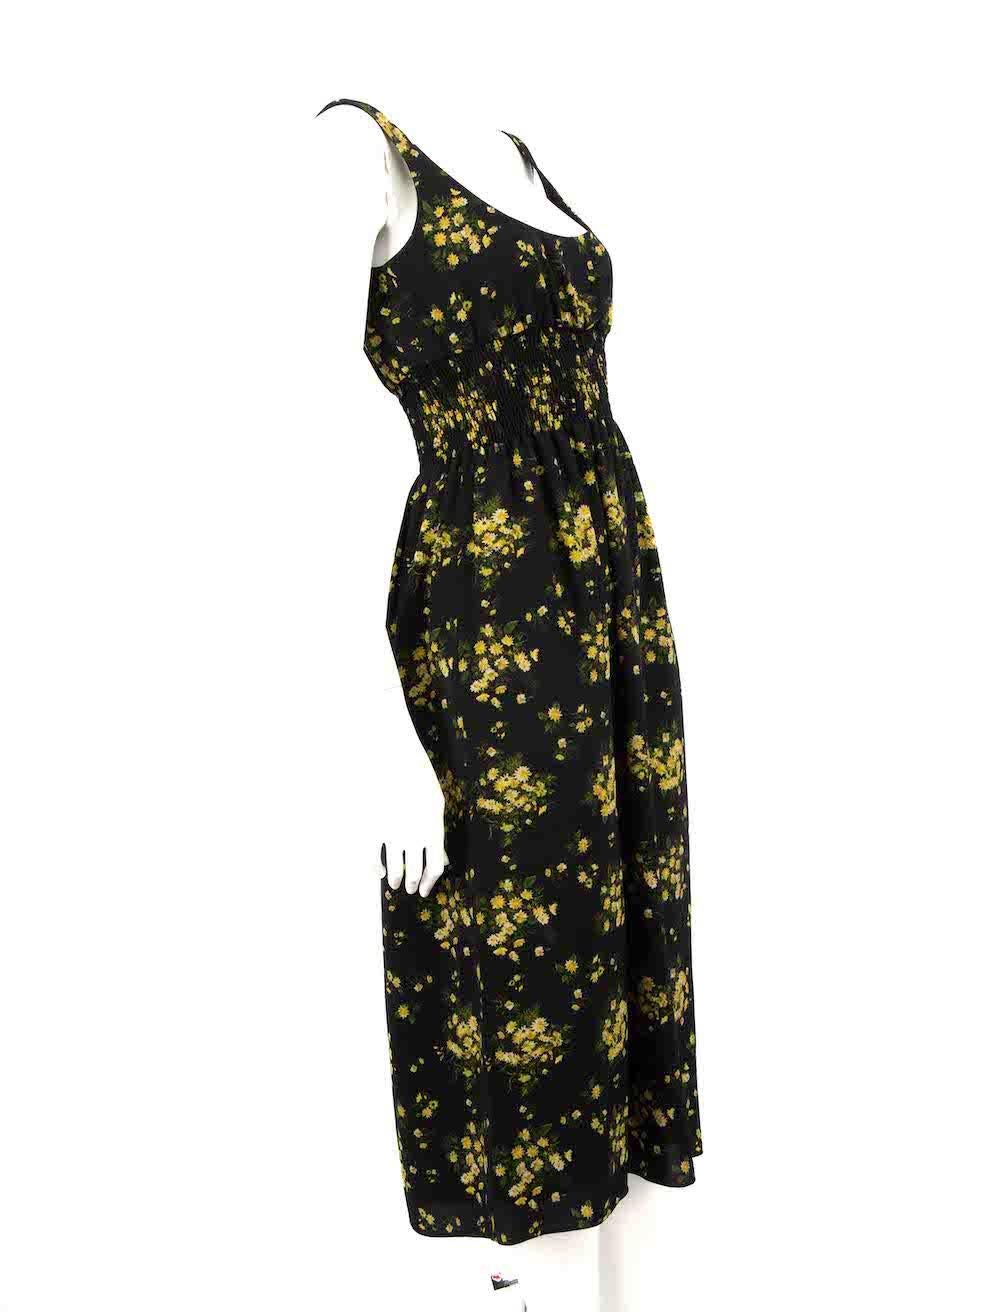 CONDITION is Very good. Hardly any visible wear to dress is evident on this used Emilia Wickstead designer resale item.
 
 
 
 Details
 
 
 Black
 
 Polyester
 
 Dress
 
 Yellow floral print
 
 Sleeveless
 
 Elasticated waist
 
 Round neck
 
 Midi
